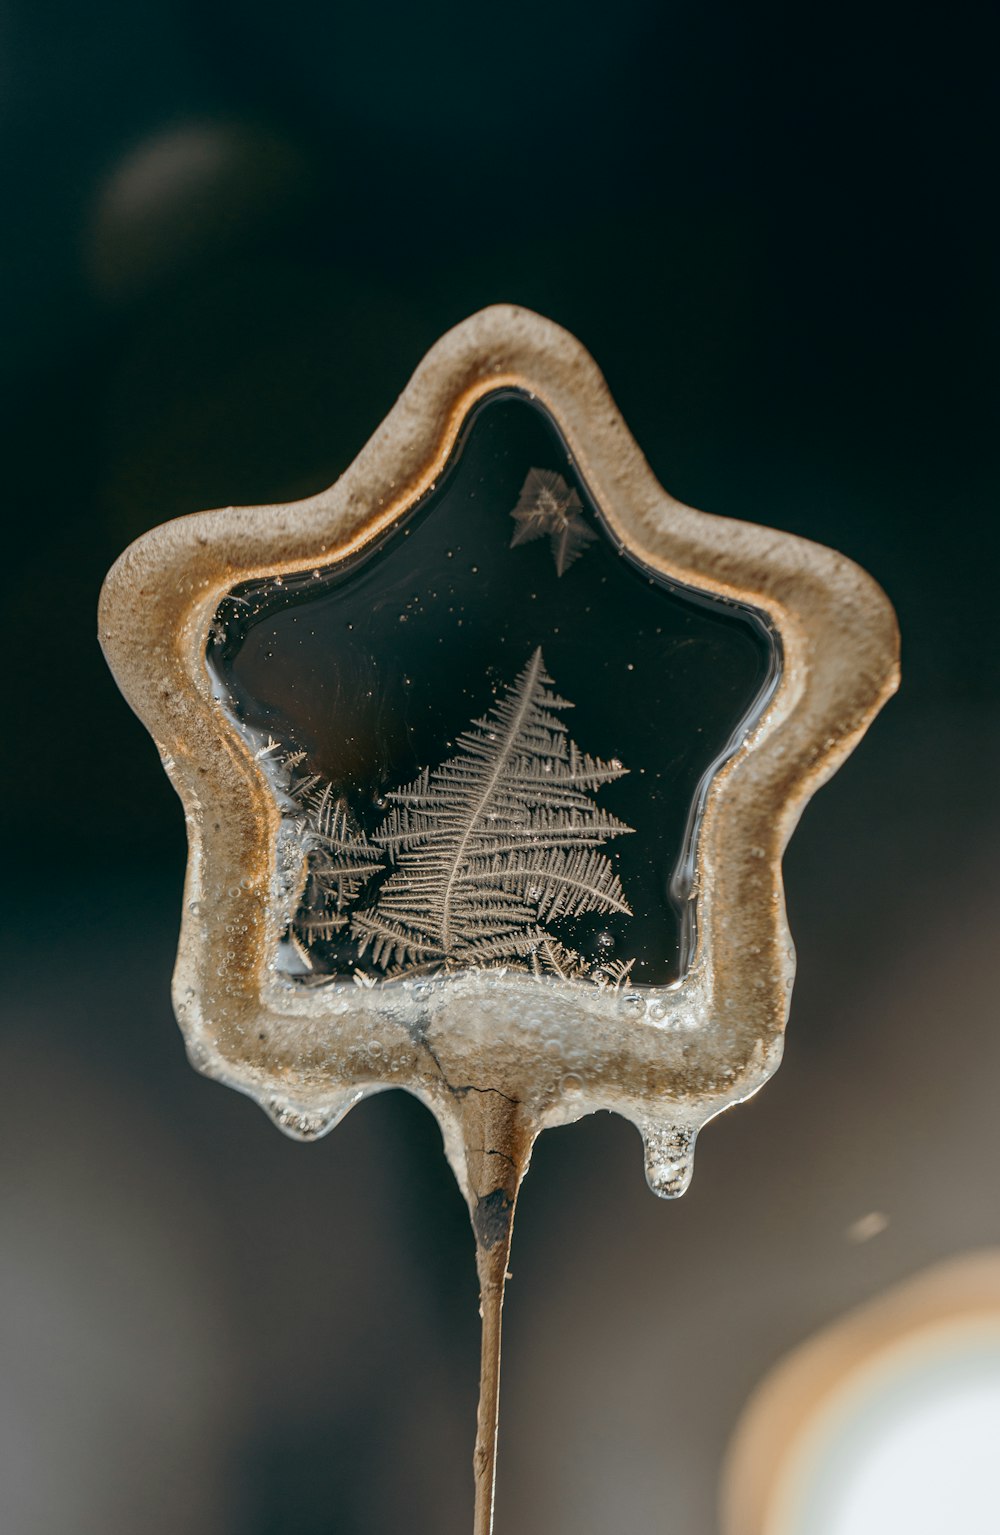 a close up of a glass object with a tree on it